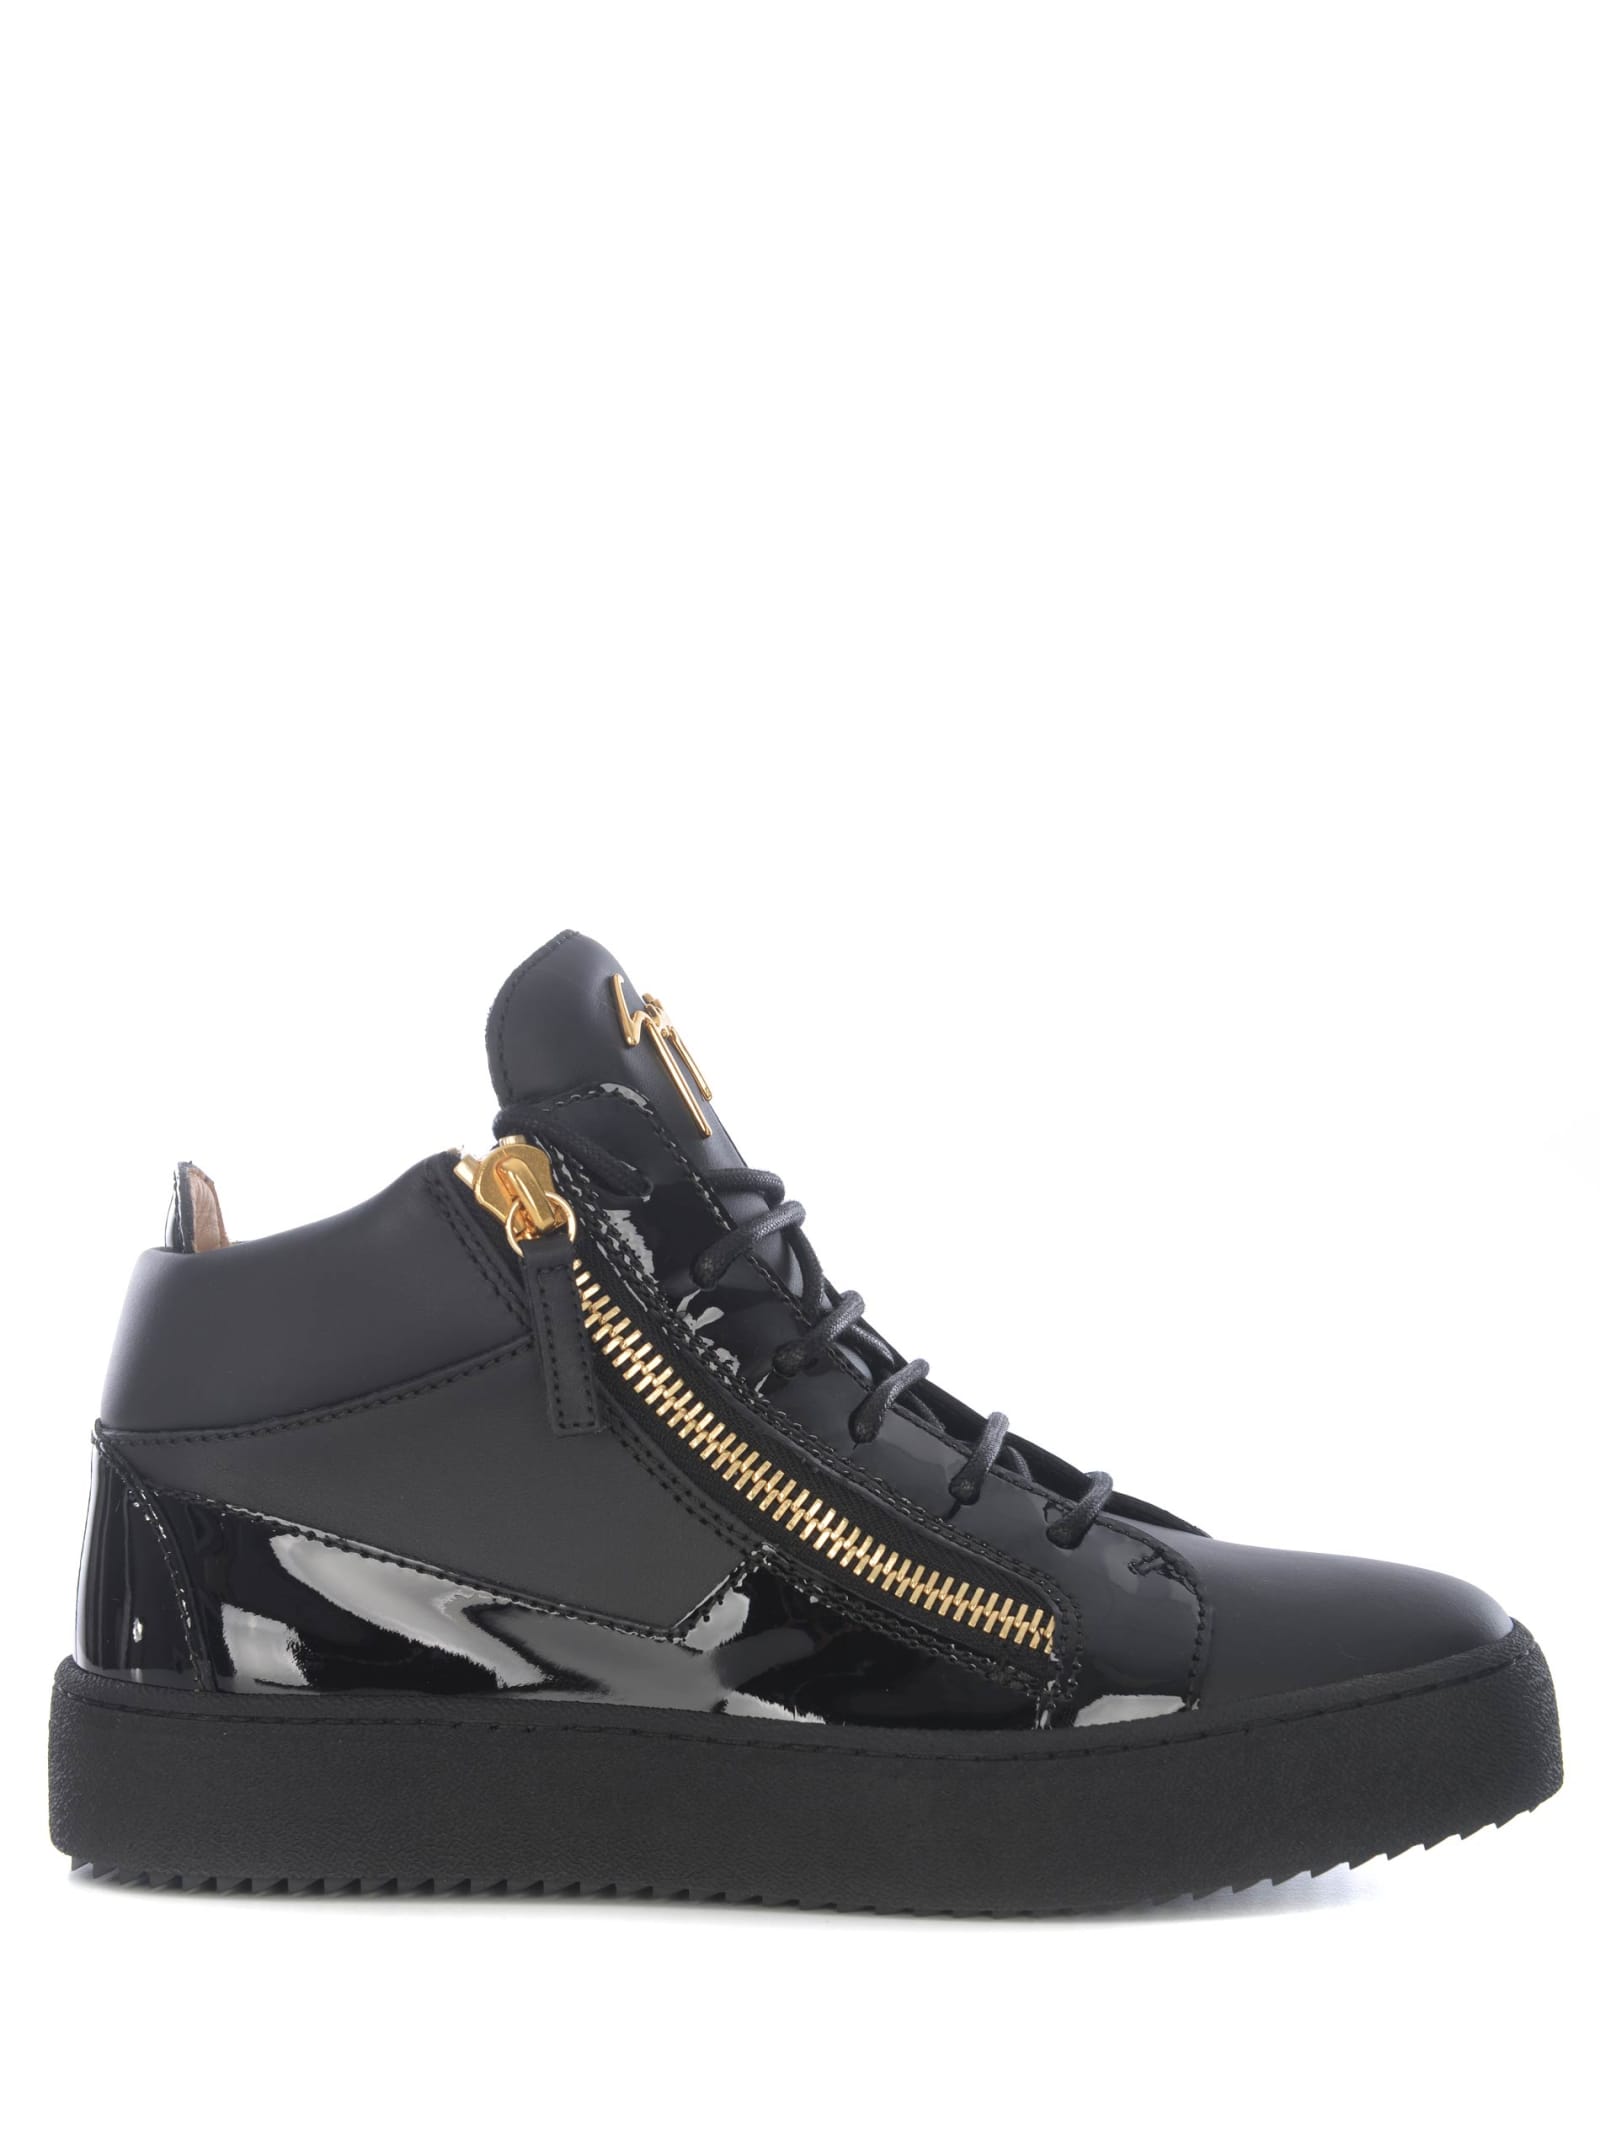 High Sneakers Giuseppe Zanotti In Leather And Patent Leather